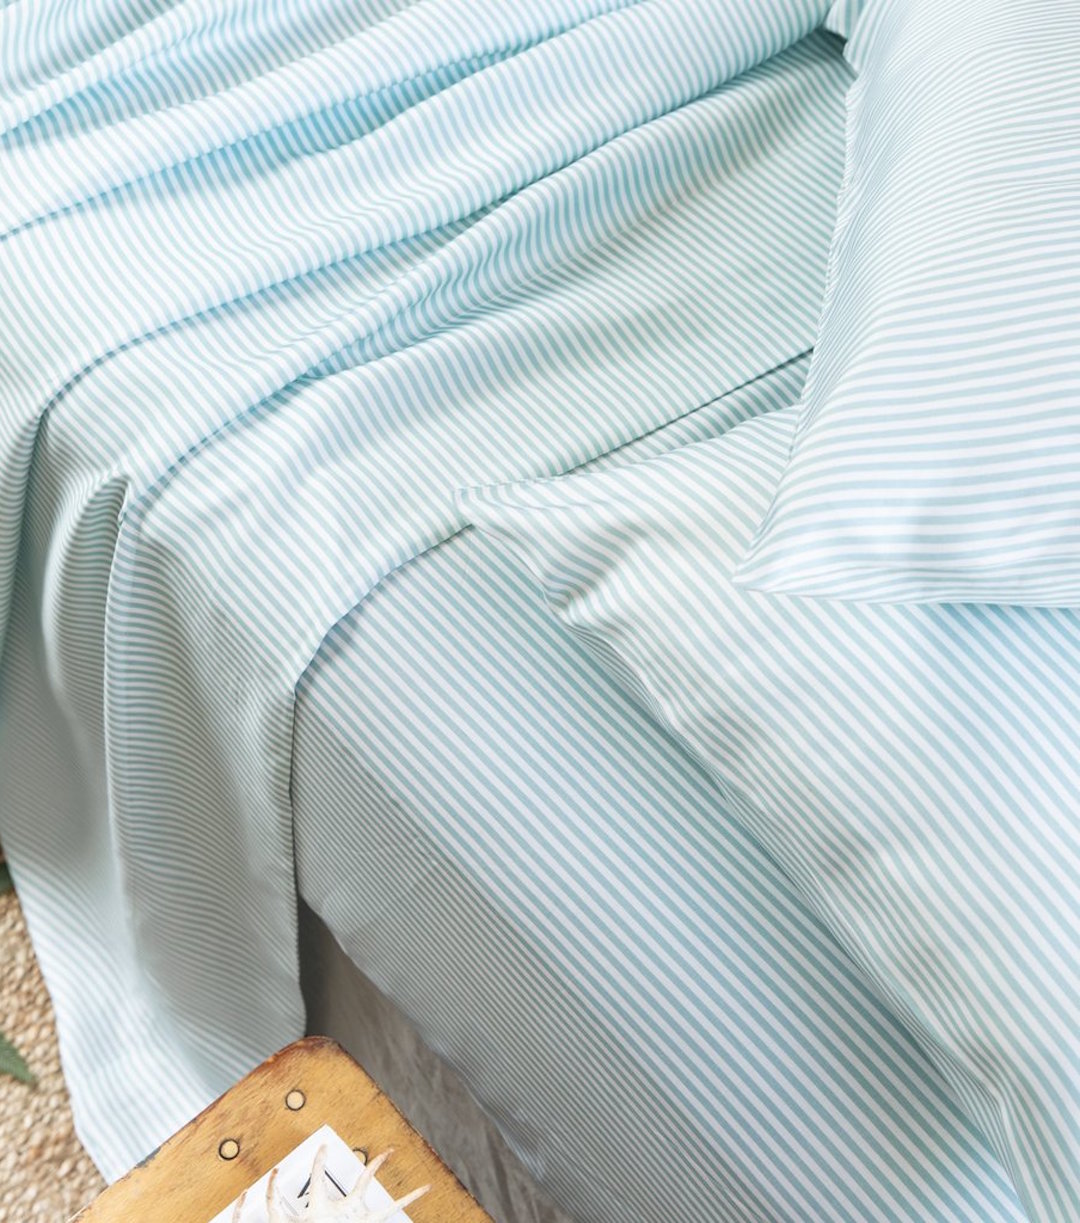 Messy blue and white sheets sit on a bed. 